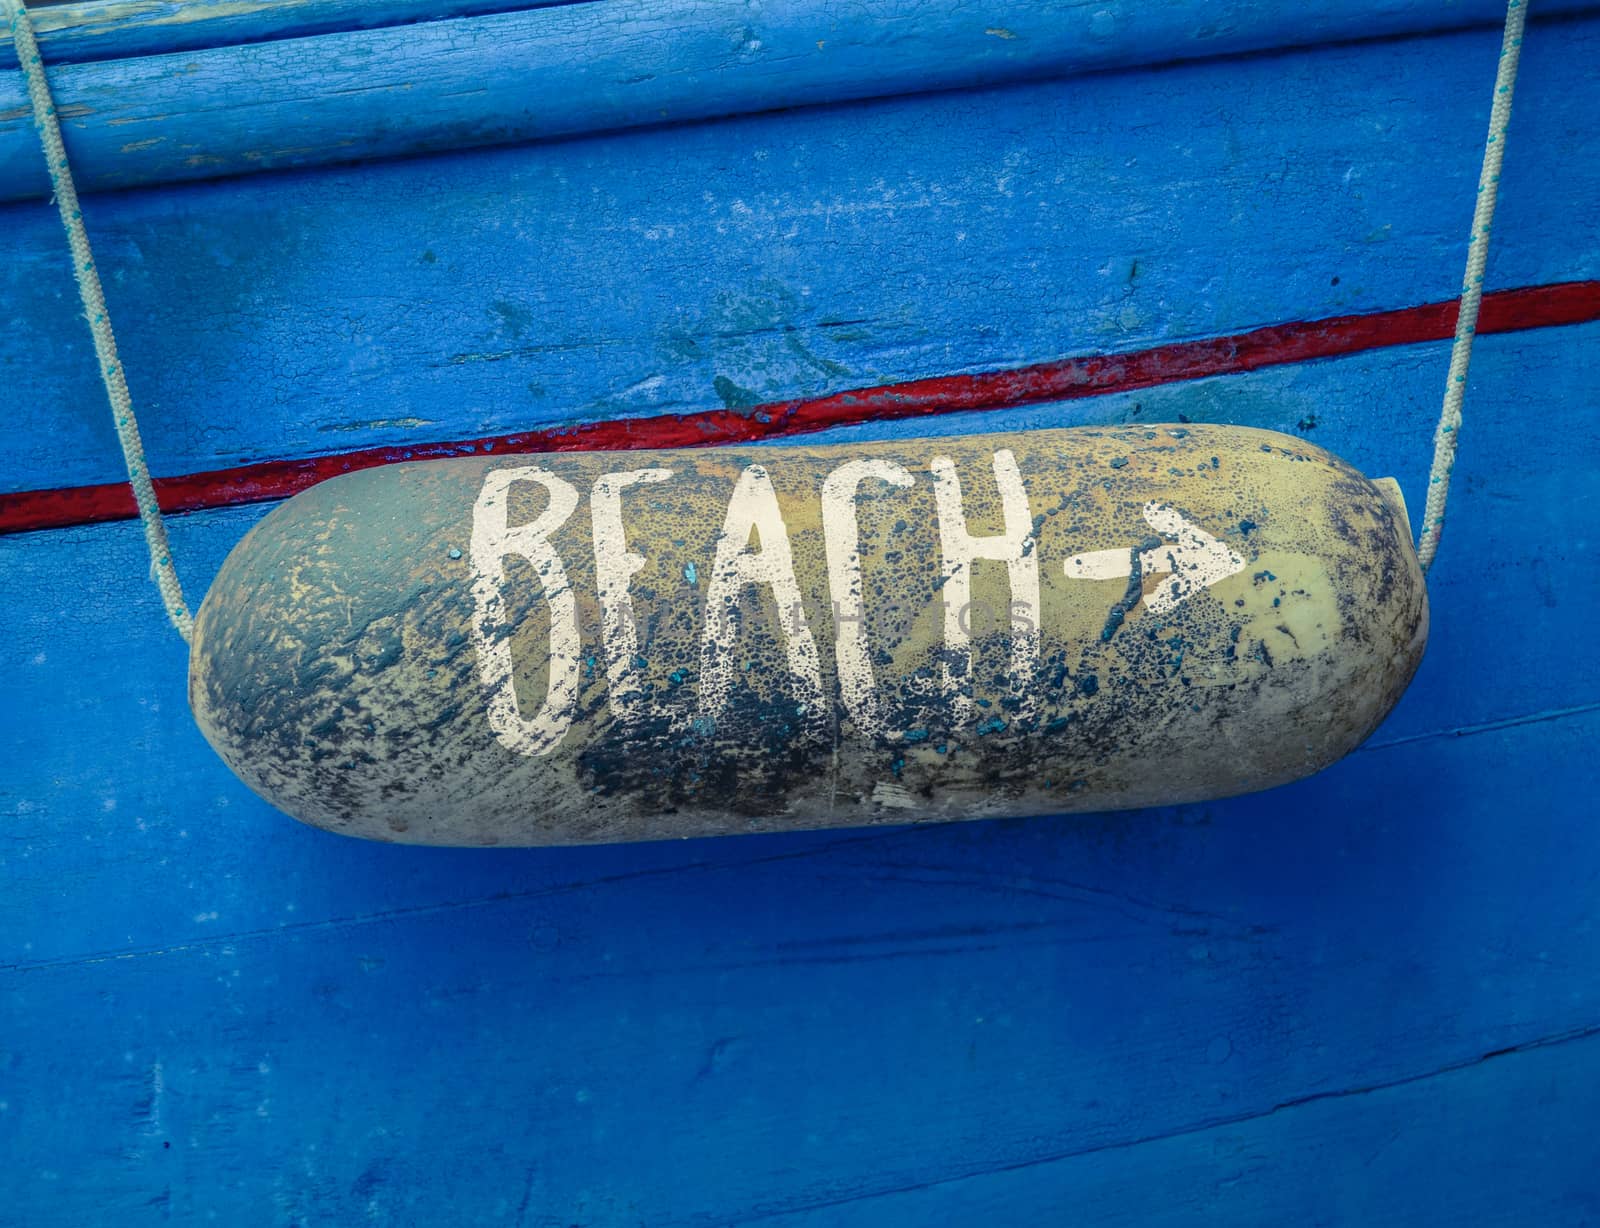 Retro Rustic Sign For A Beach On A Buoy On Of An Old Blue Boat